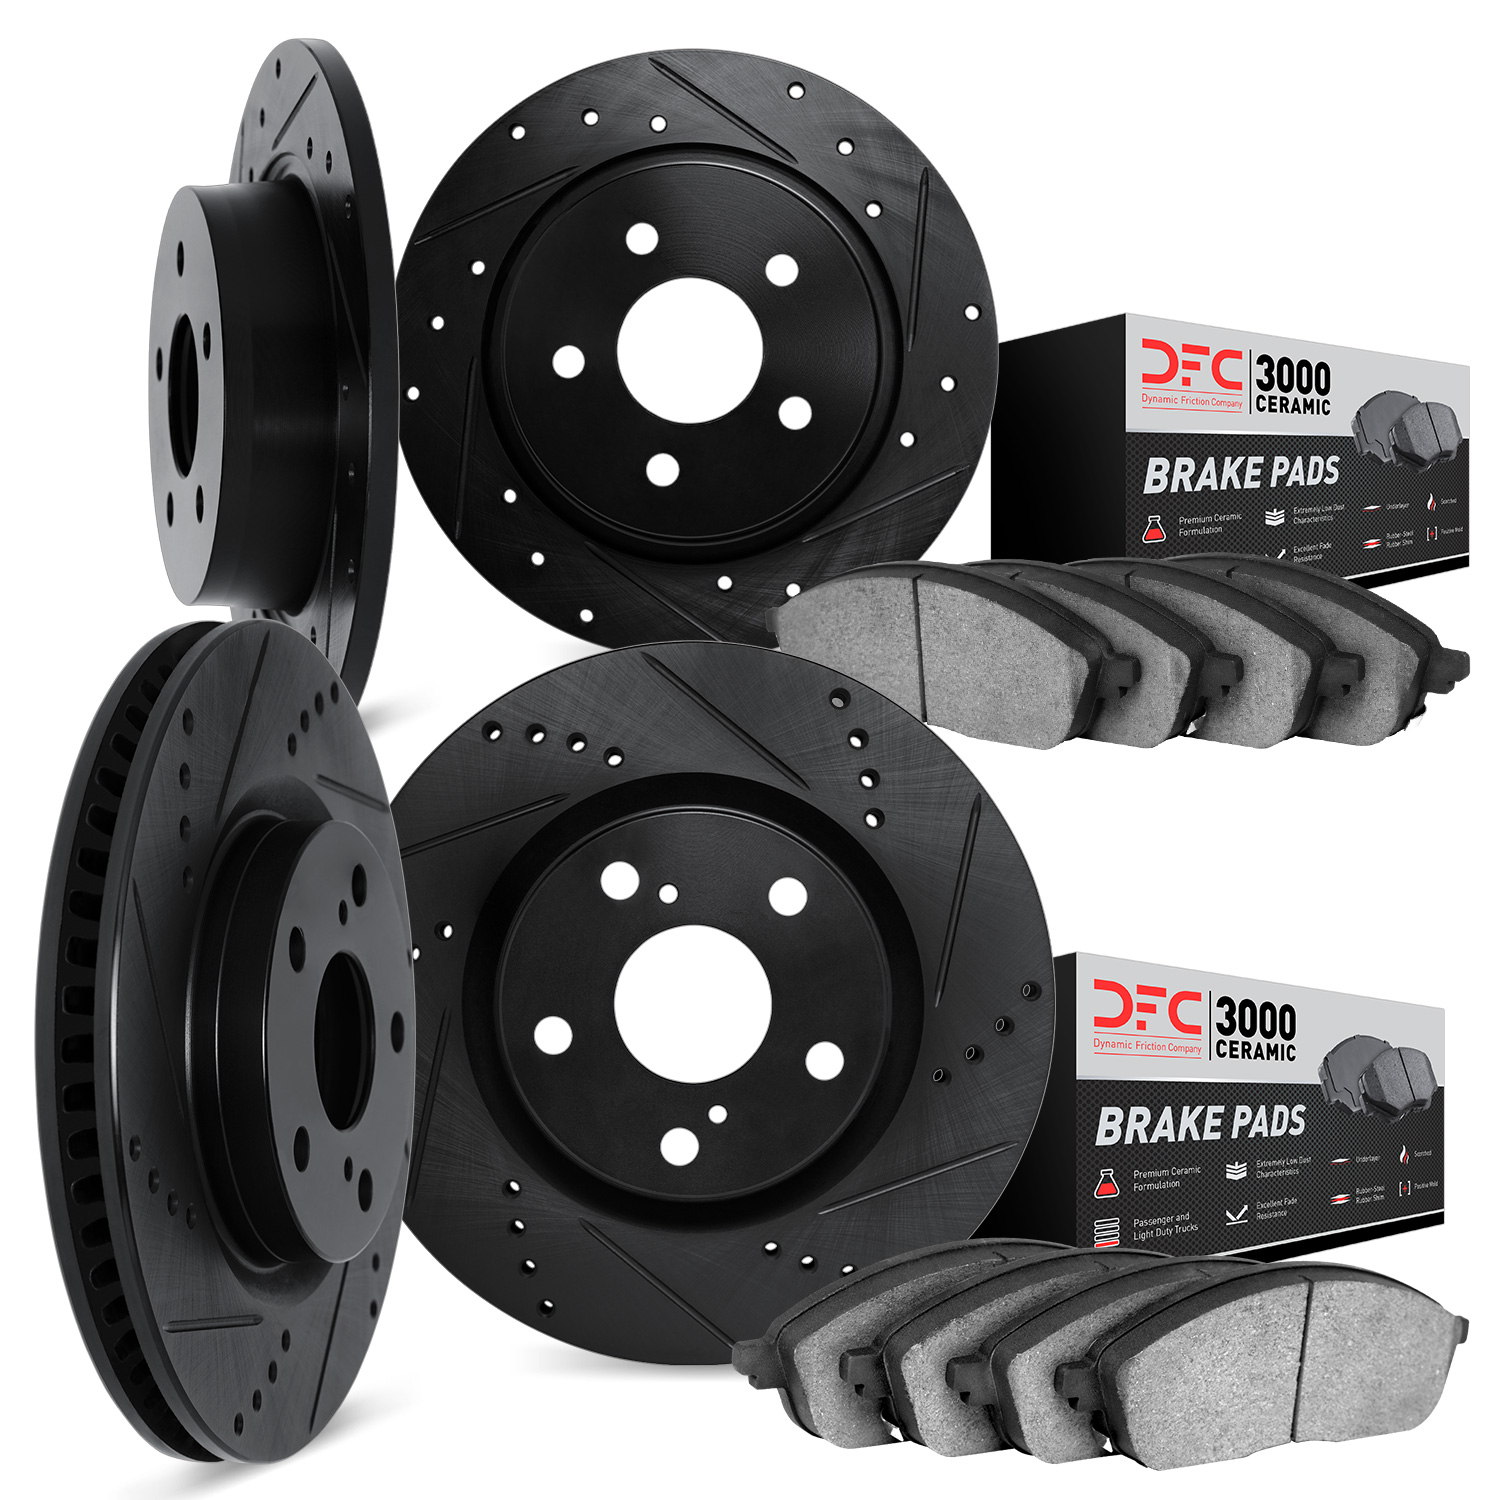 8304-54059 Drilled/Slotted Brake Rotors with 3000-Series Ceramic Brake Pads Kit [Black], 2004-2013 Volvo, Position: Front and Re